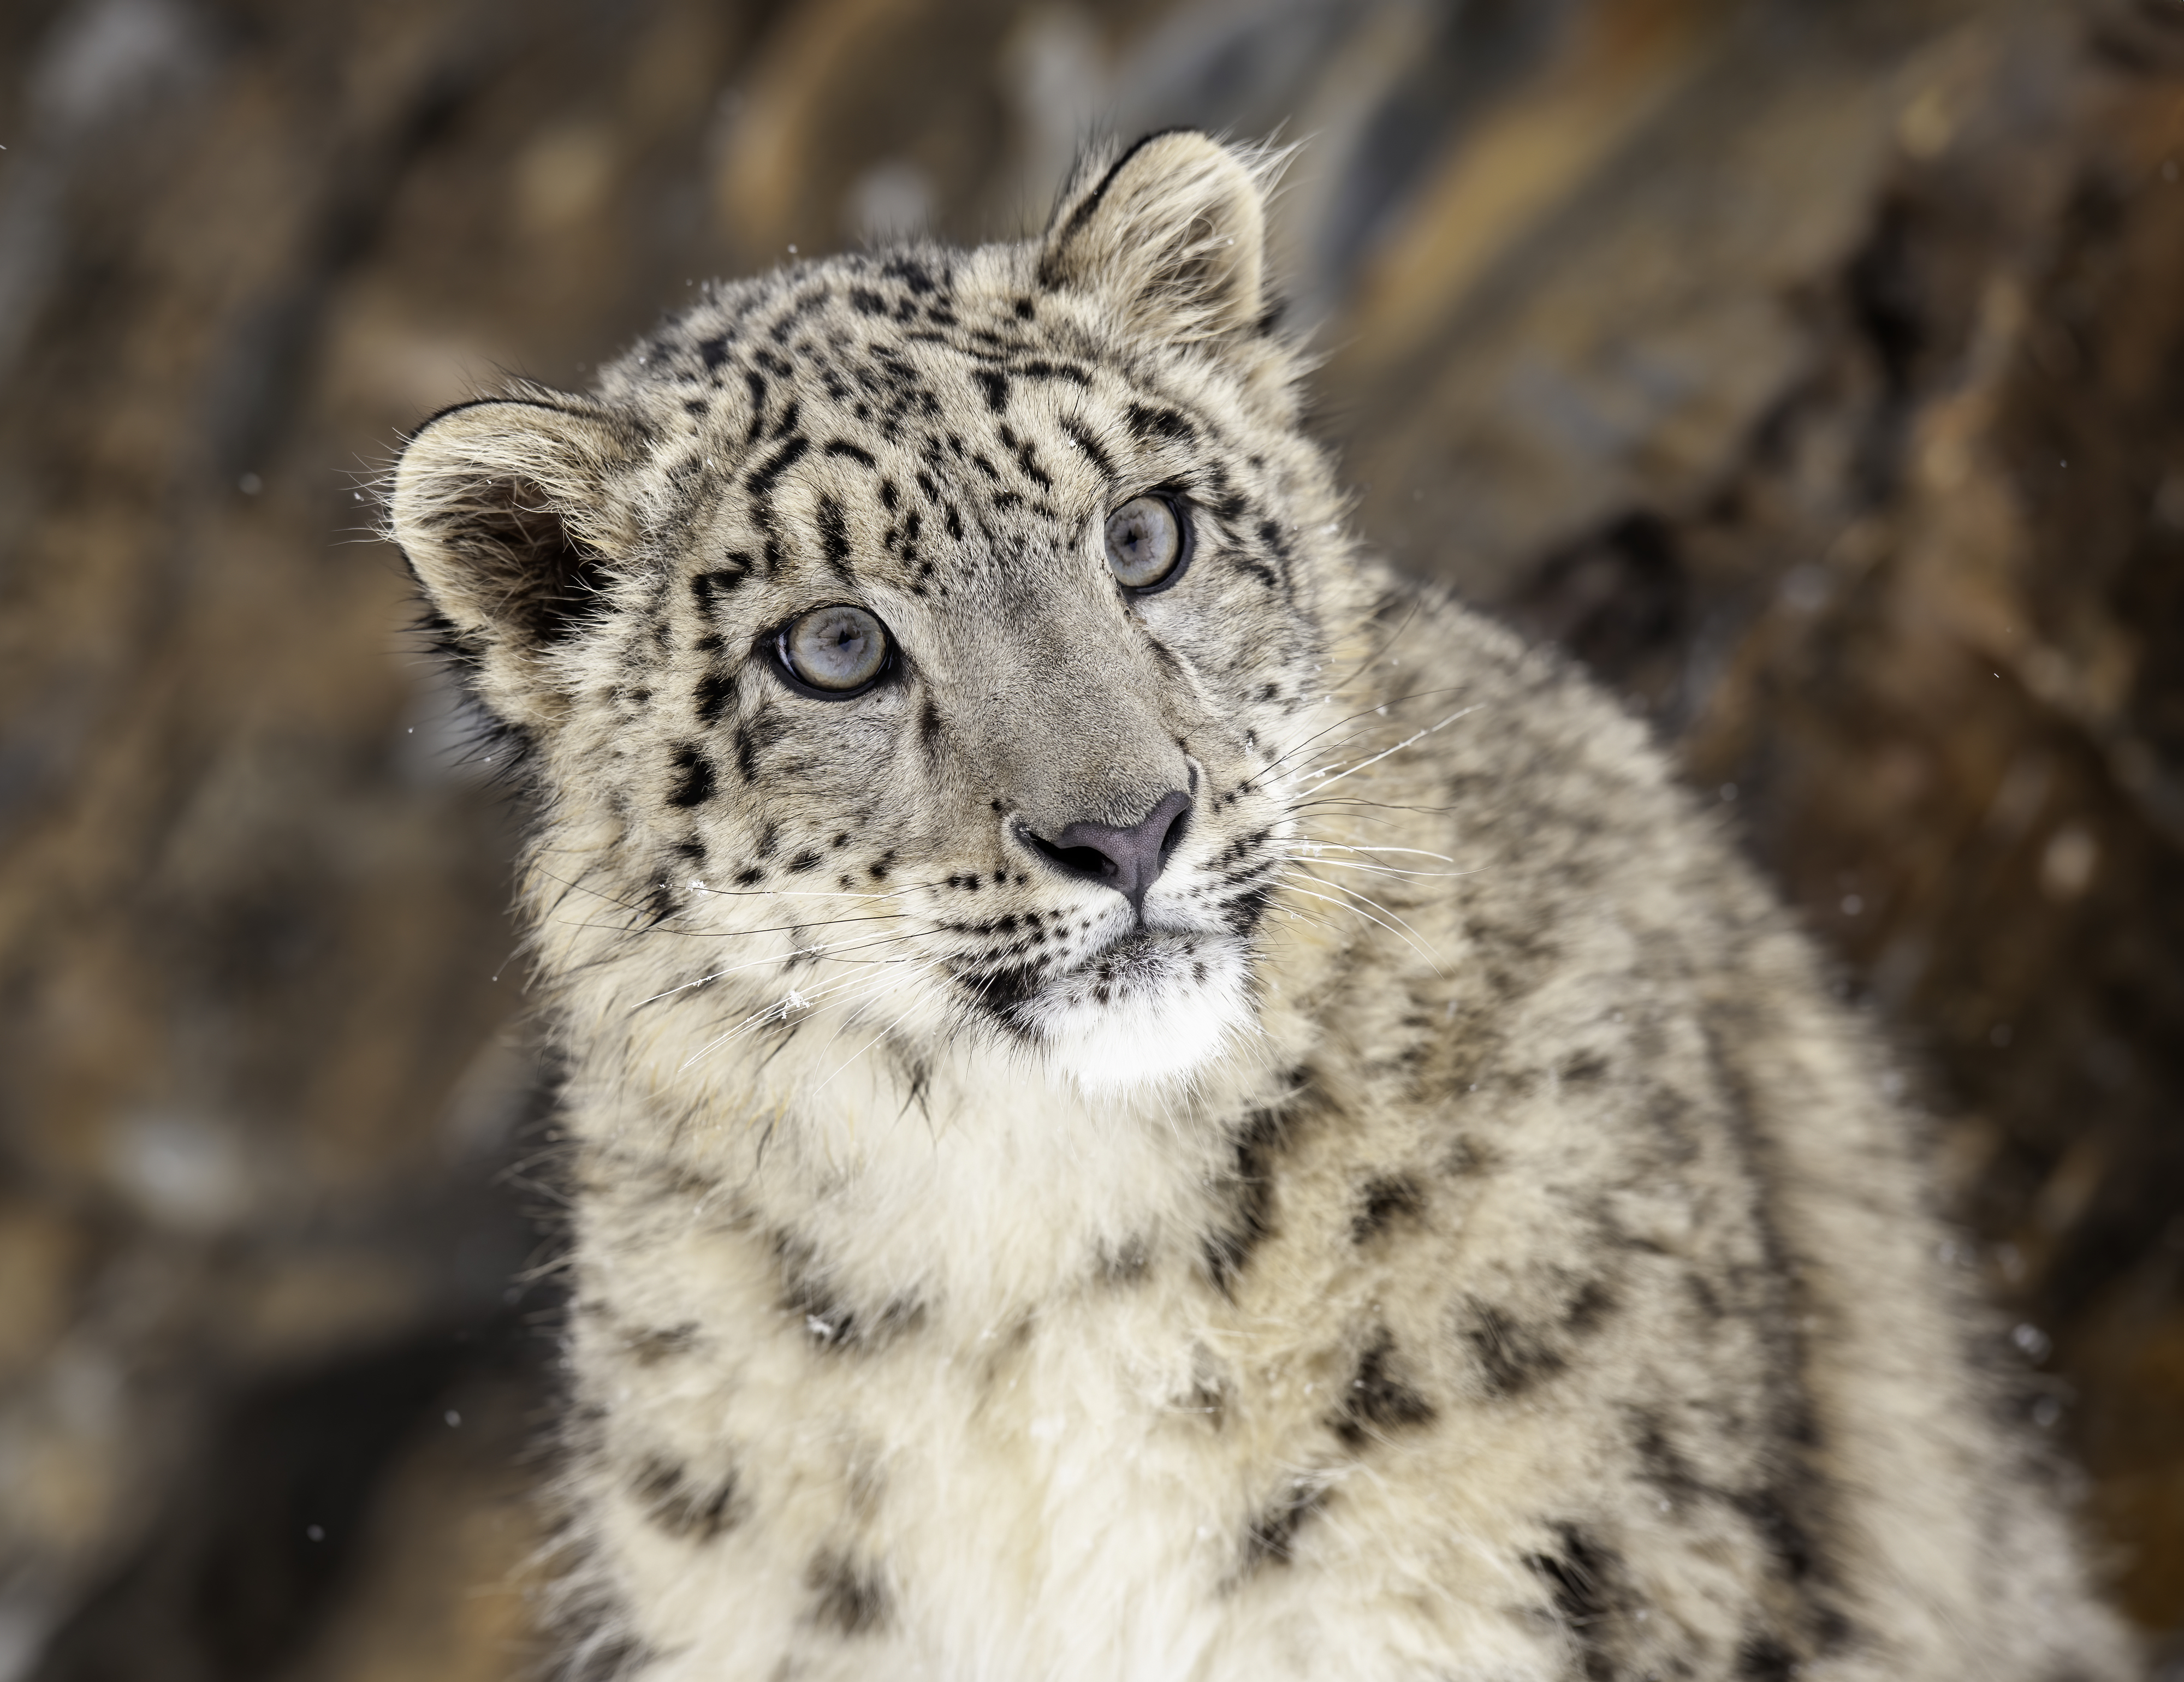 A close-up of a young snow leopard with light spots on its fur, looking slightly to the side, with a rocky background